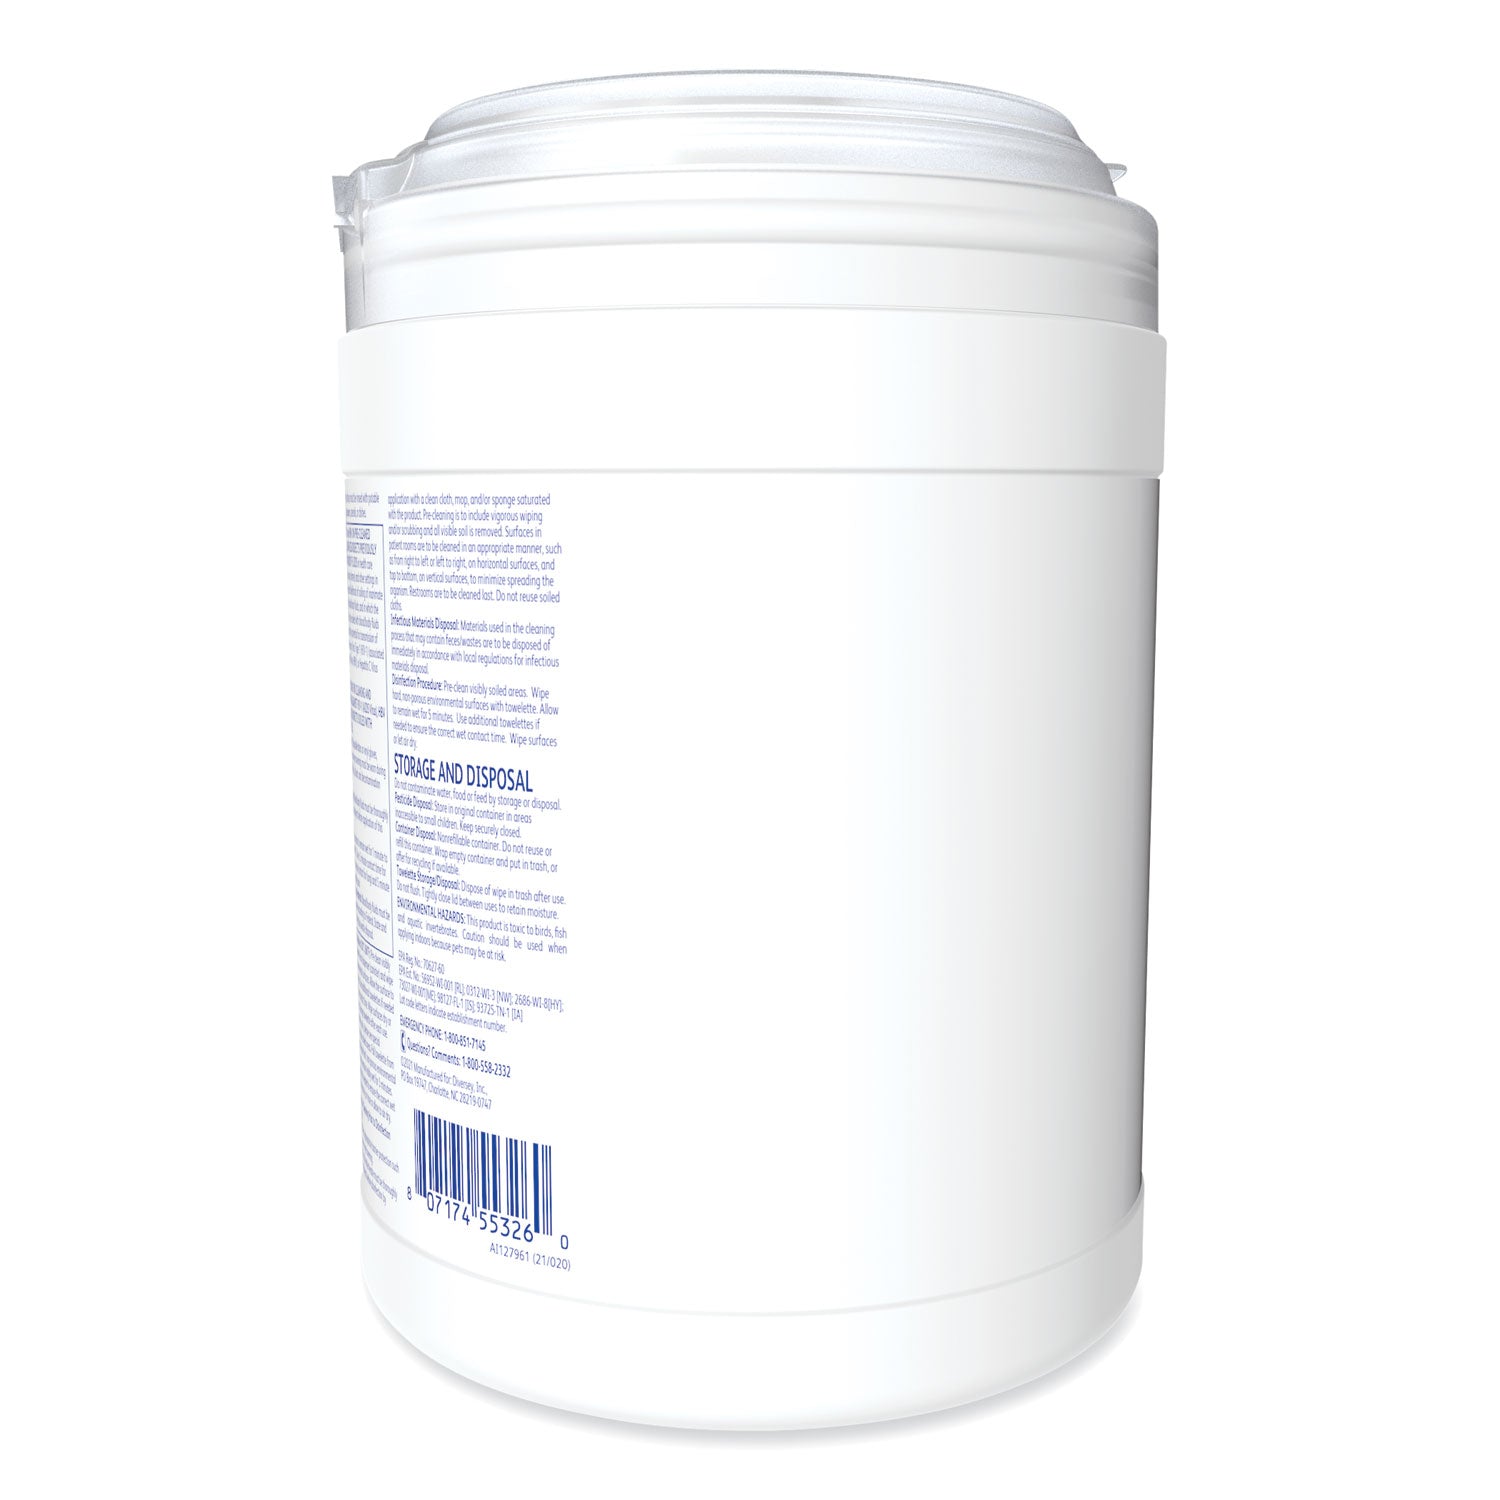 oxivir-tb-disinfectant-wipes-6-x-69-characteristic-scent-white-160-canister-4-canisters-carton_dvo101105152 - 5